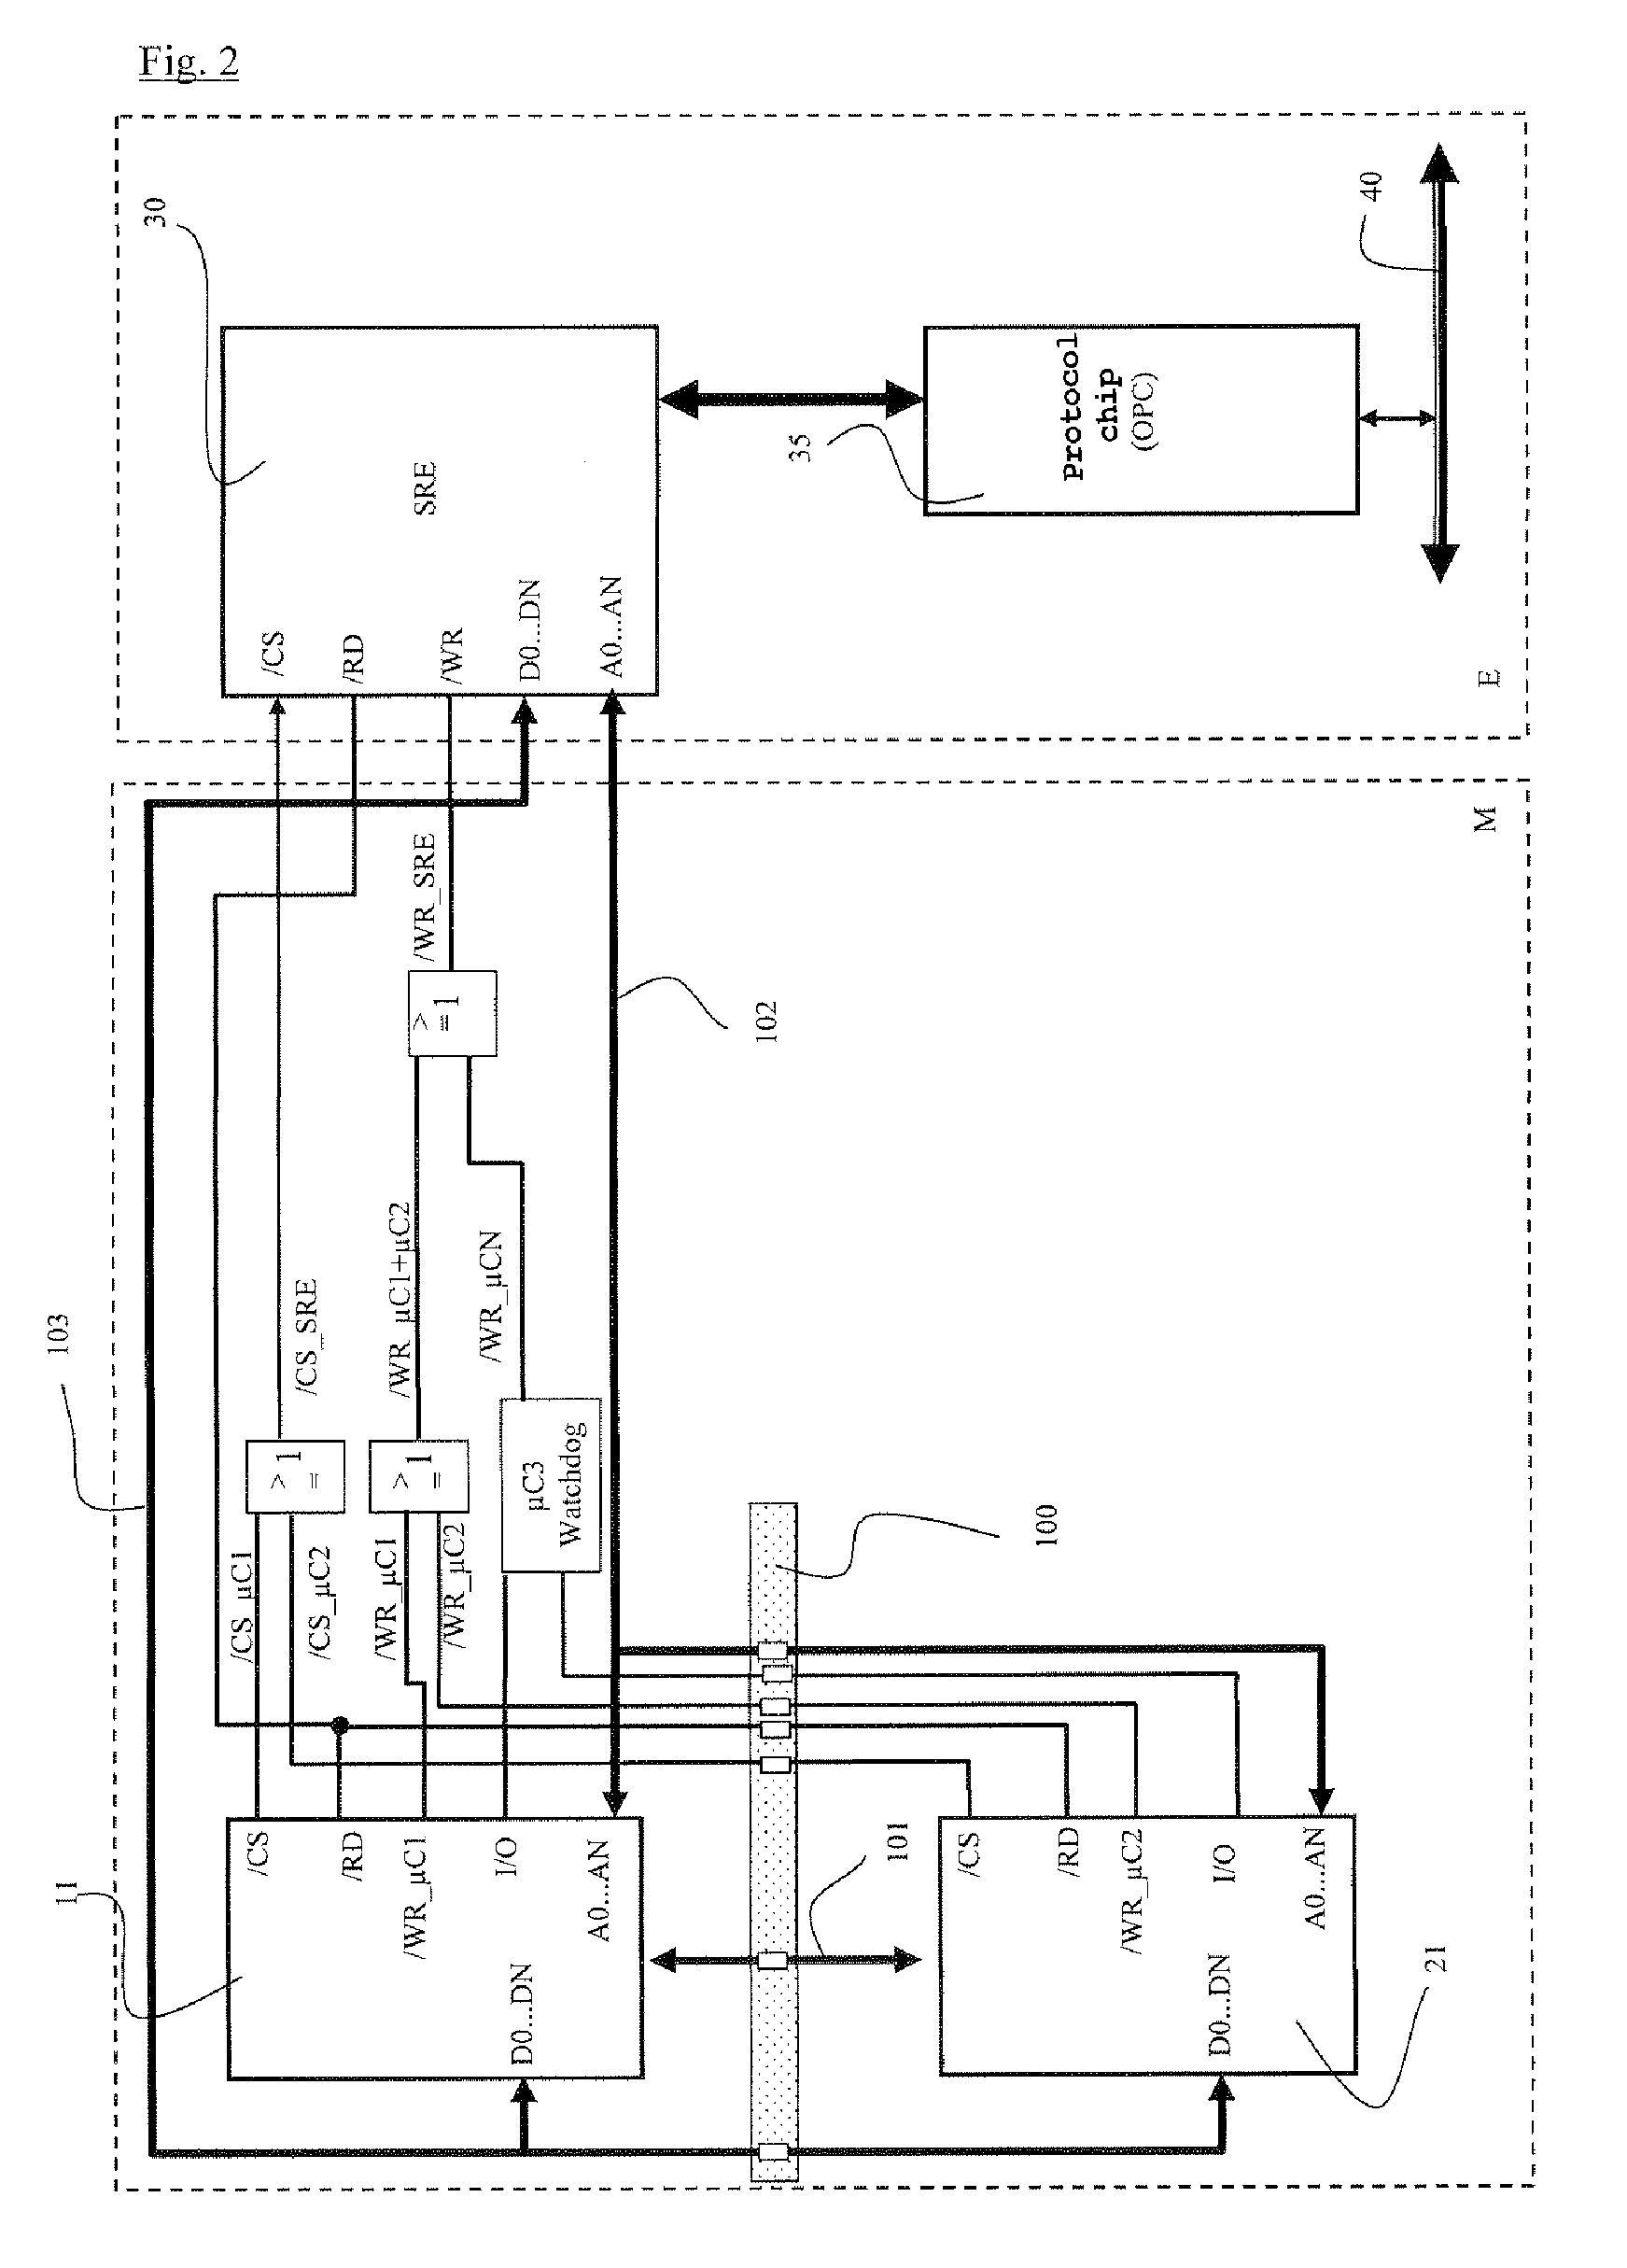 Method and apparatus for converting multichannel messages into a single-channel safe message